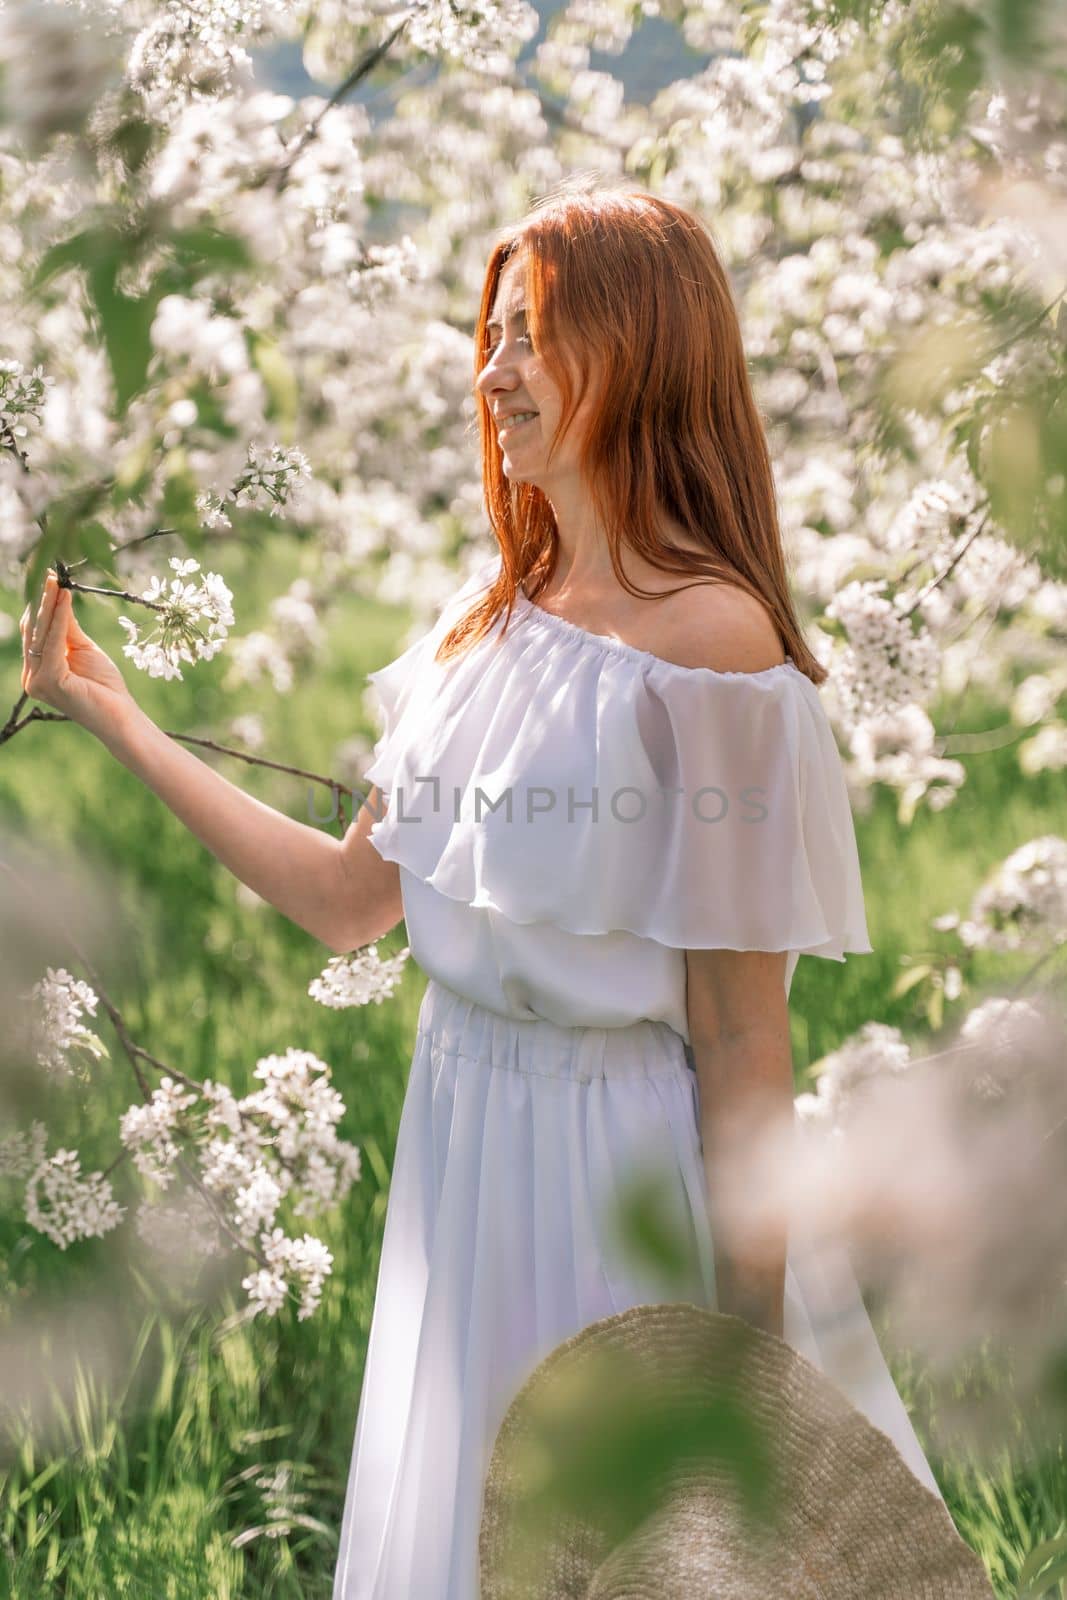 Woman cherry orchard. A happy woman in a long white long dress walks through the green spring blooming cherry garden. Happy cheerful princess bride. The fabric of the skirt flutters in the wind